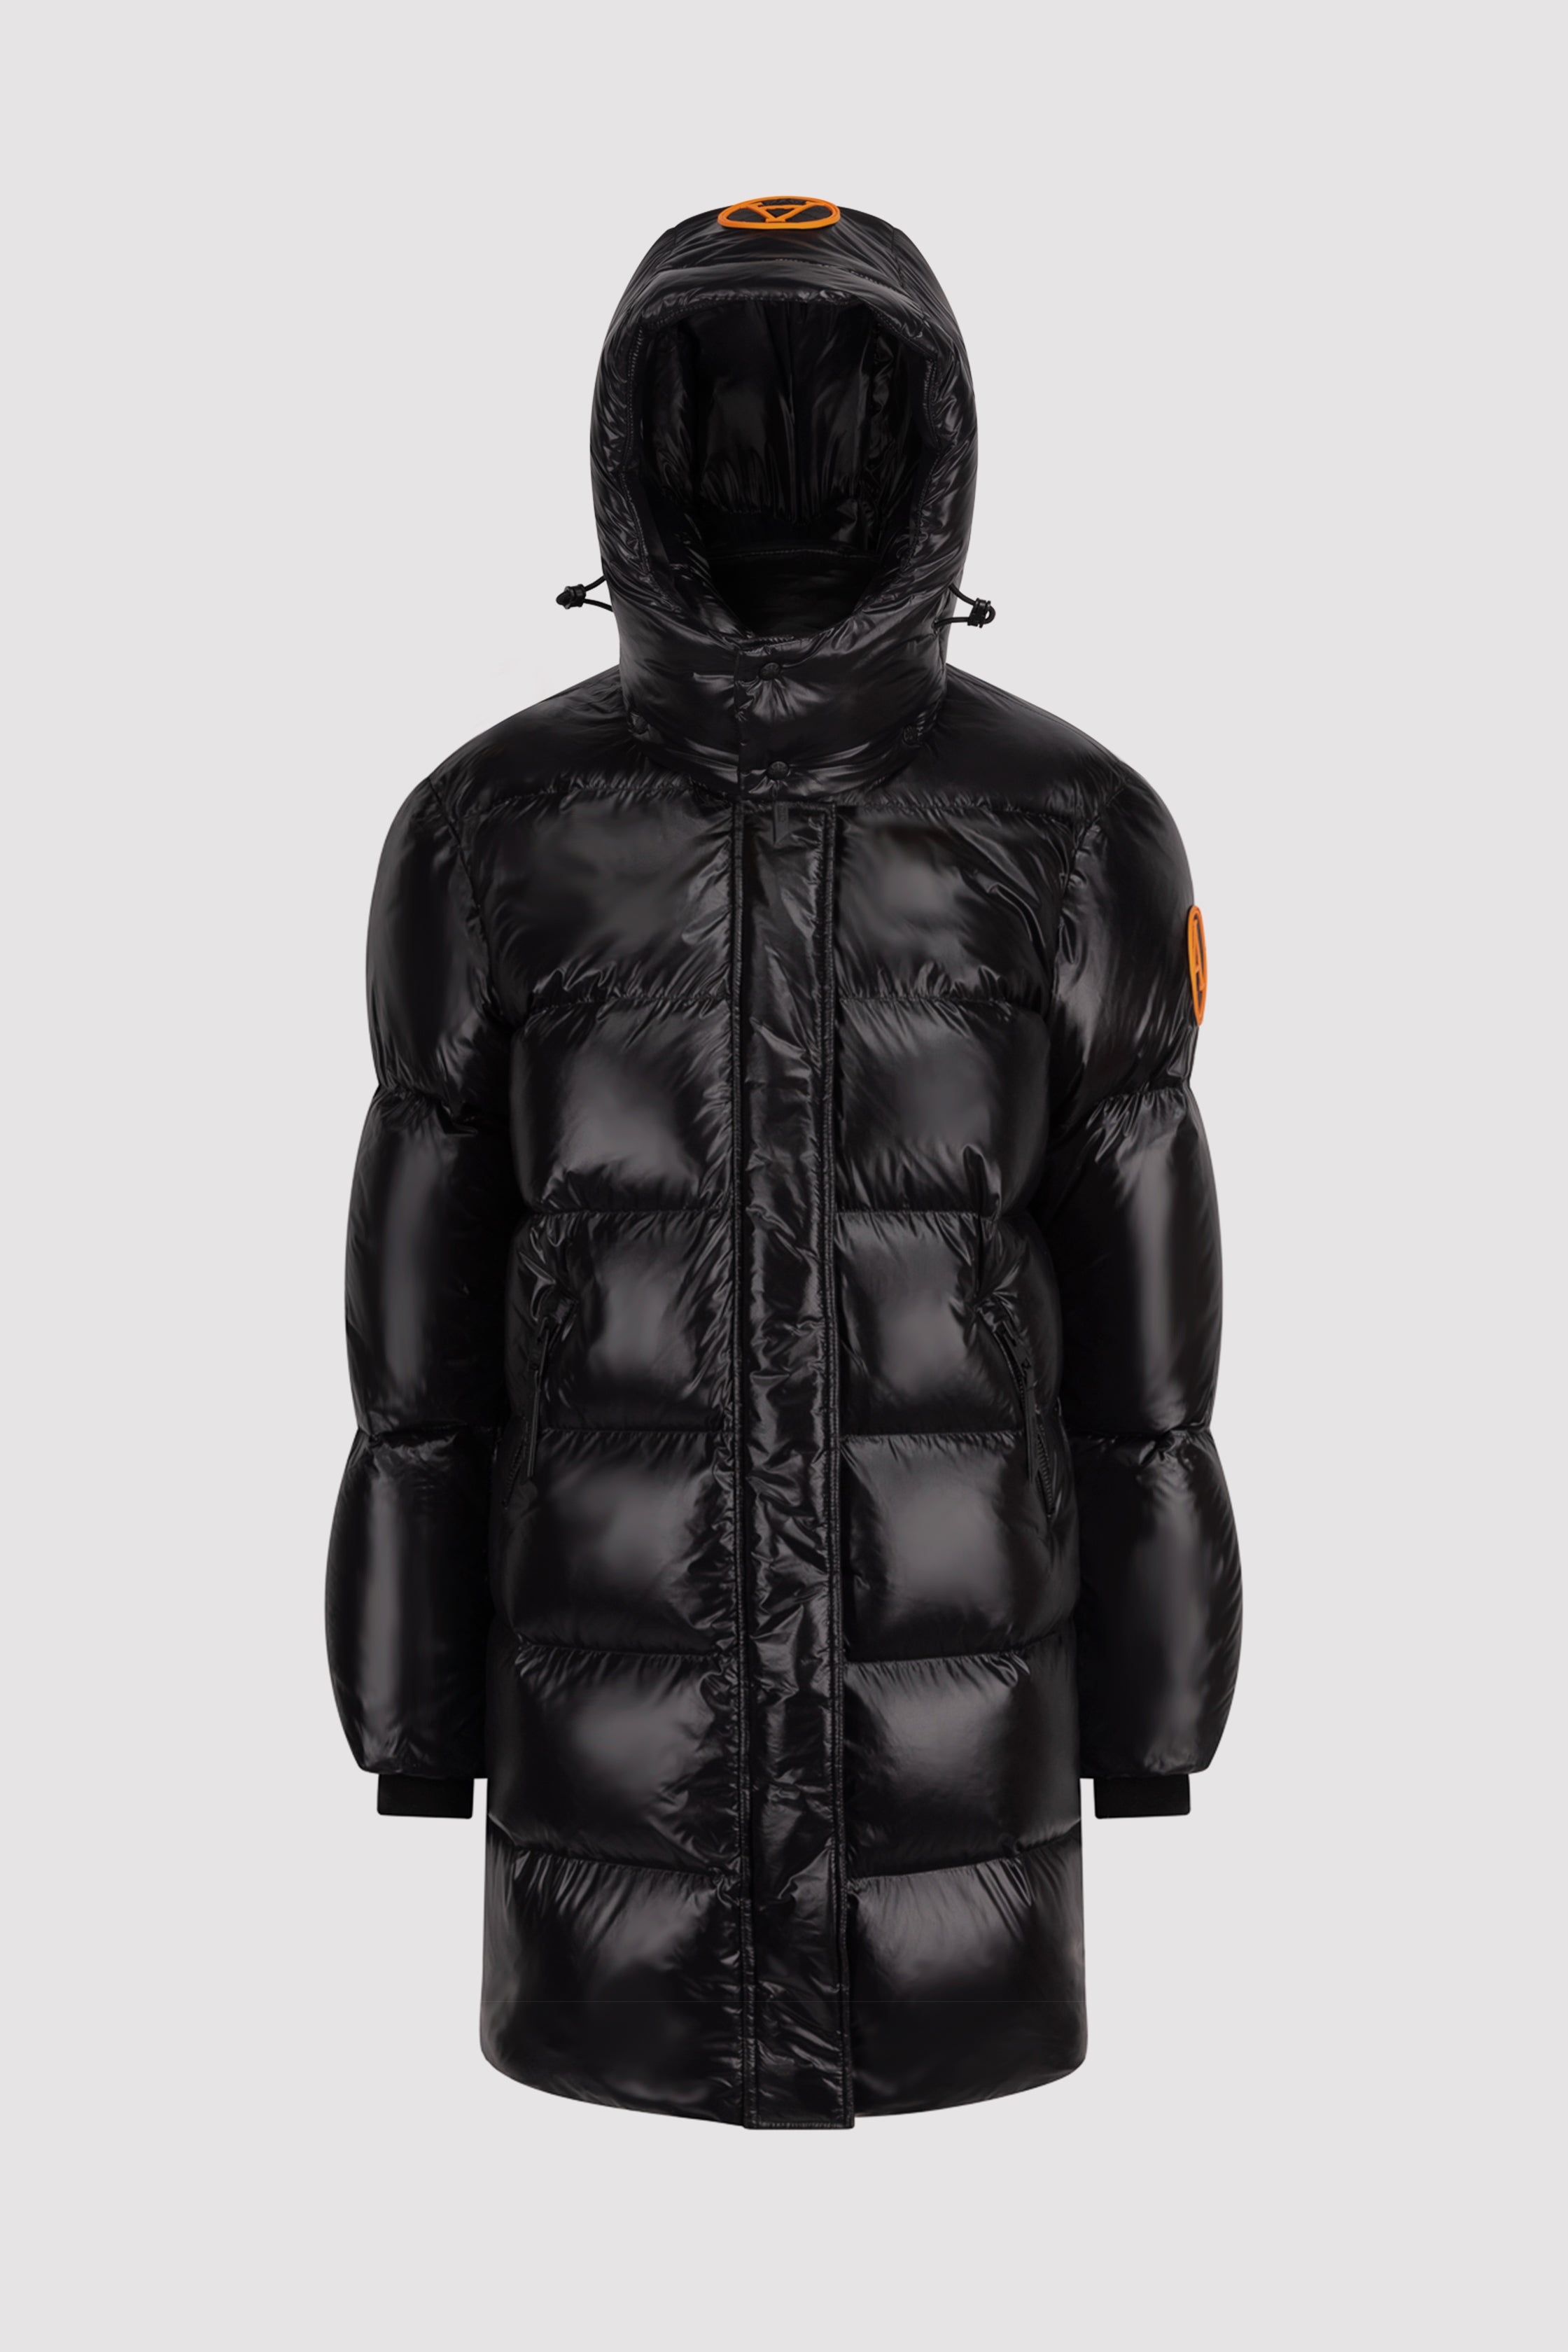 Women's Arctic Army Mid-Length Puffer in Black